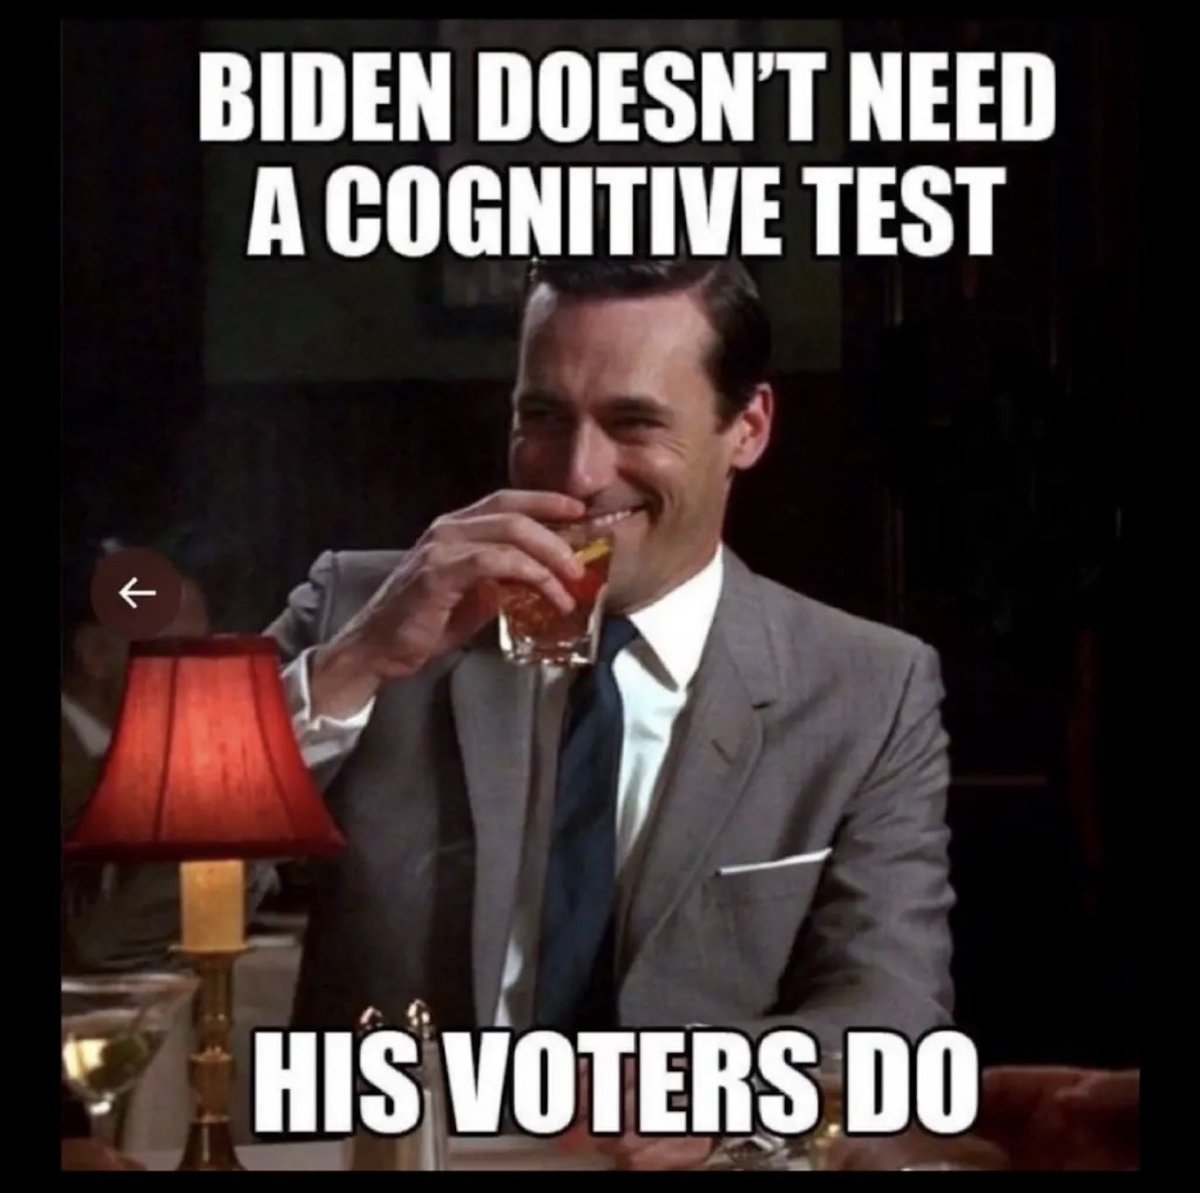 @BidenHQ Wow. You found one black guy thats voting for the azzhat @JoeBiden How long did it take to find him?